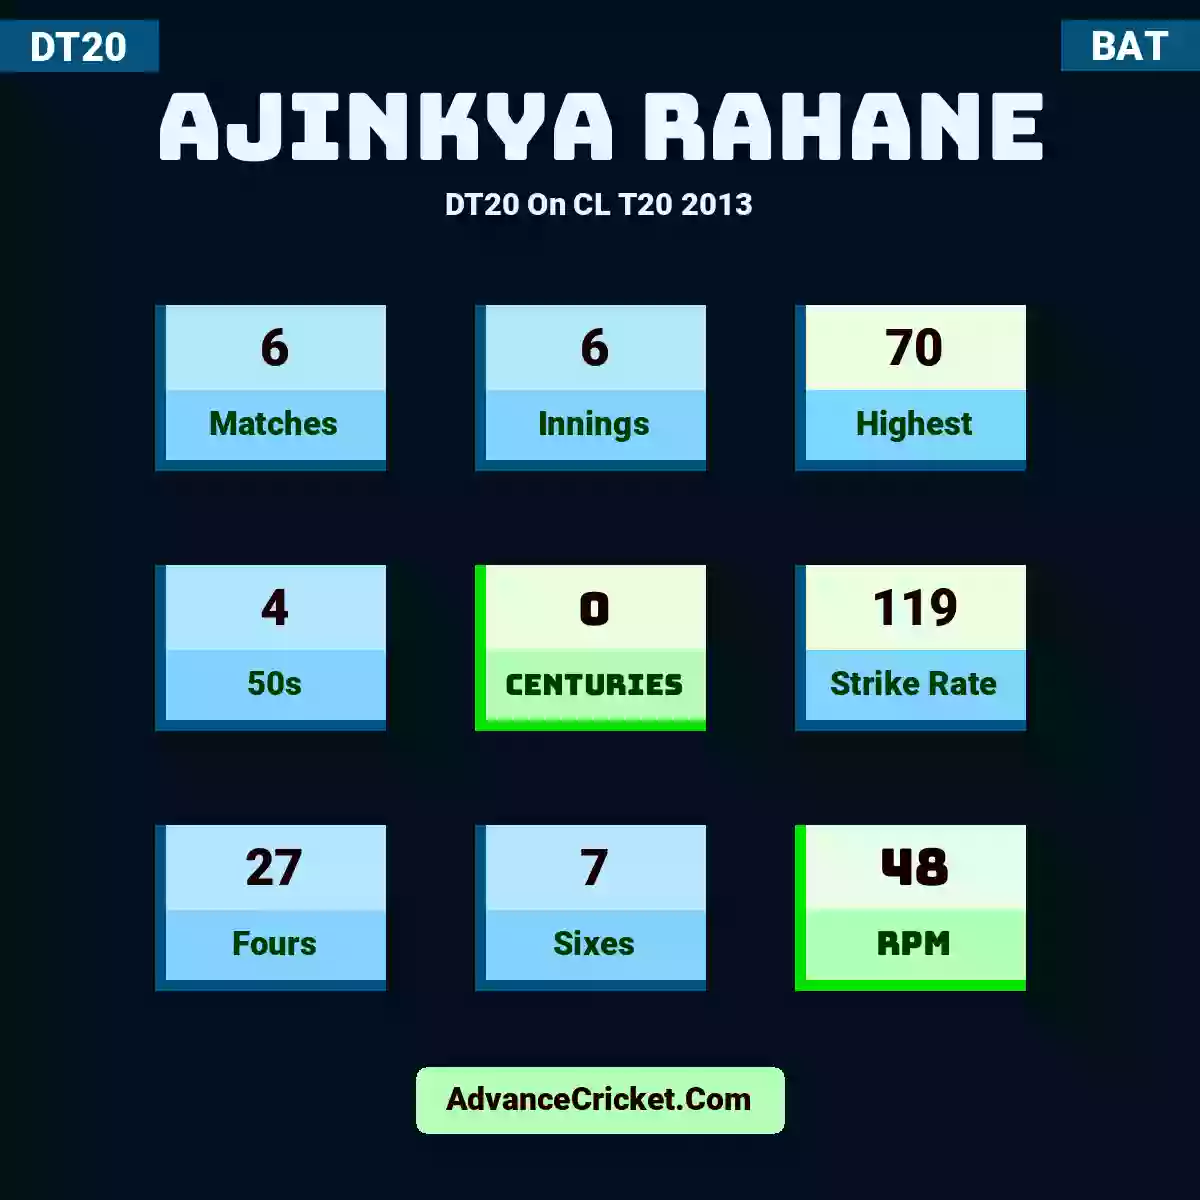 Ajinkya Rahane DT20  On CL T20 2013, Ajinkya Rahane played 6 matches, scored 70 runs as highest, 4 half-centuries, and 0 centuries, with a strike rate of 119. A.Rahane hit 27 fours and 7 sixes, with an RPM of 48.